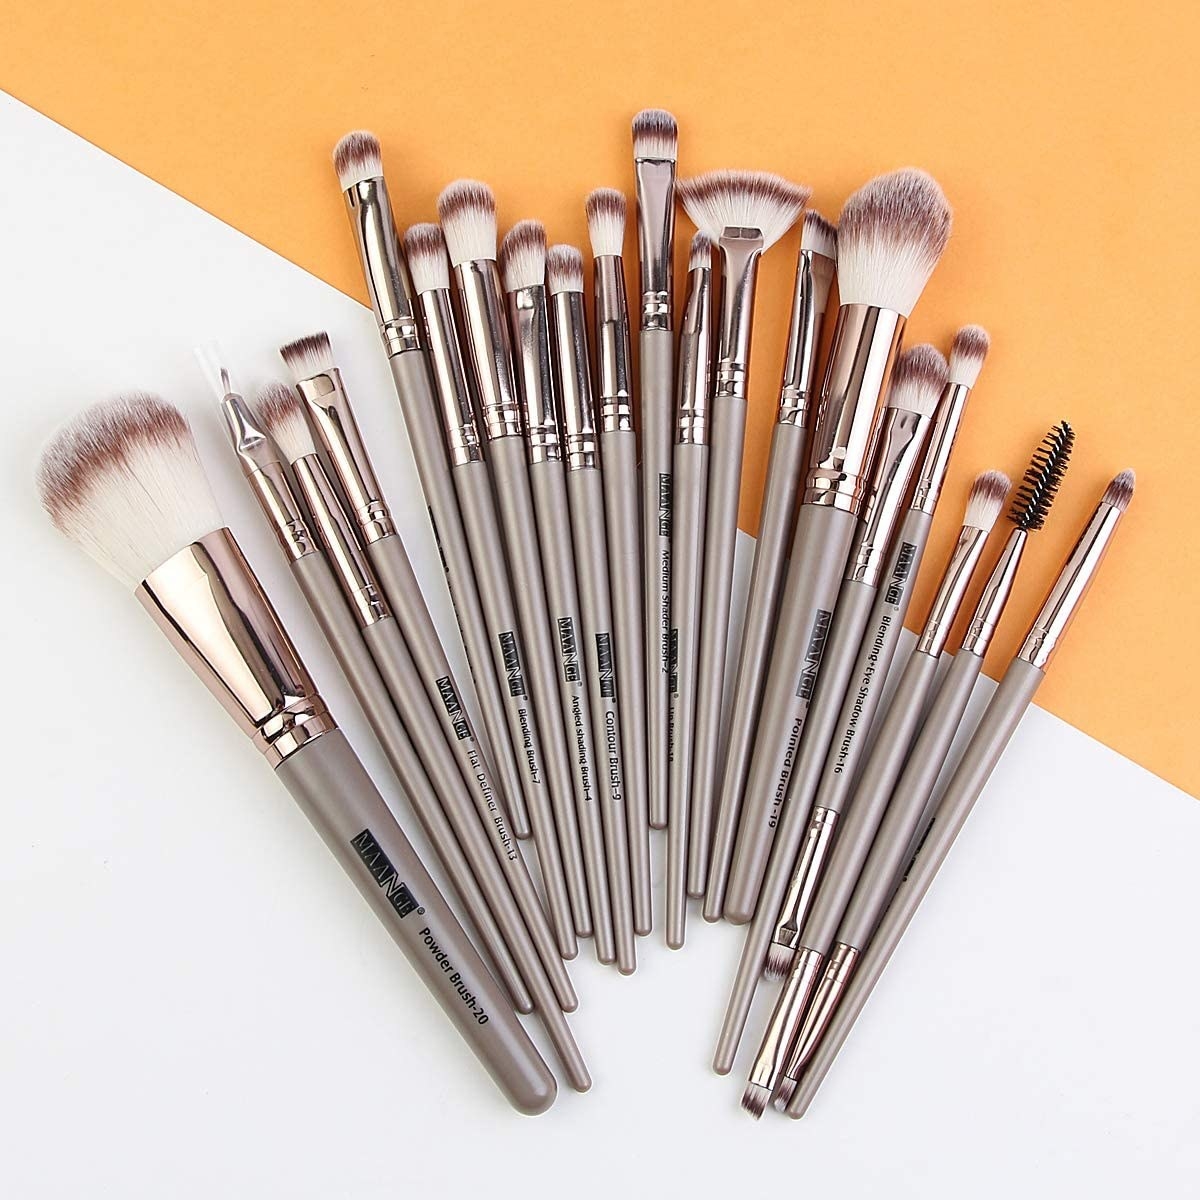 a flatlay of the full 20 piece makeup brush set